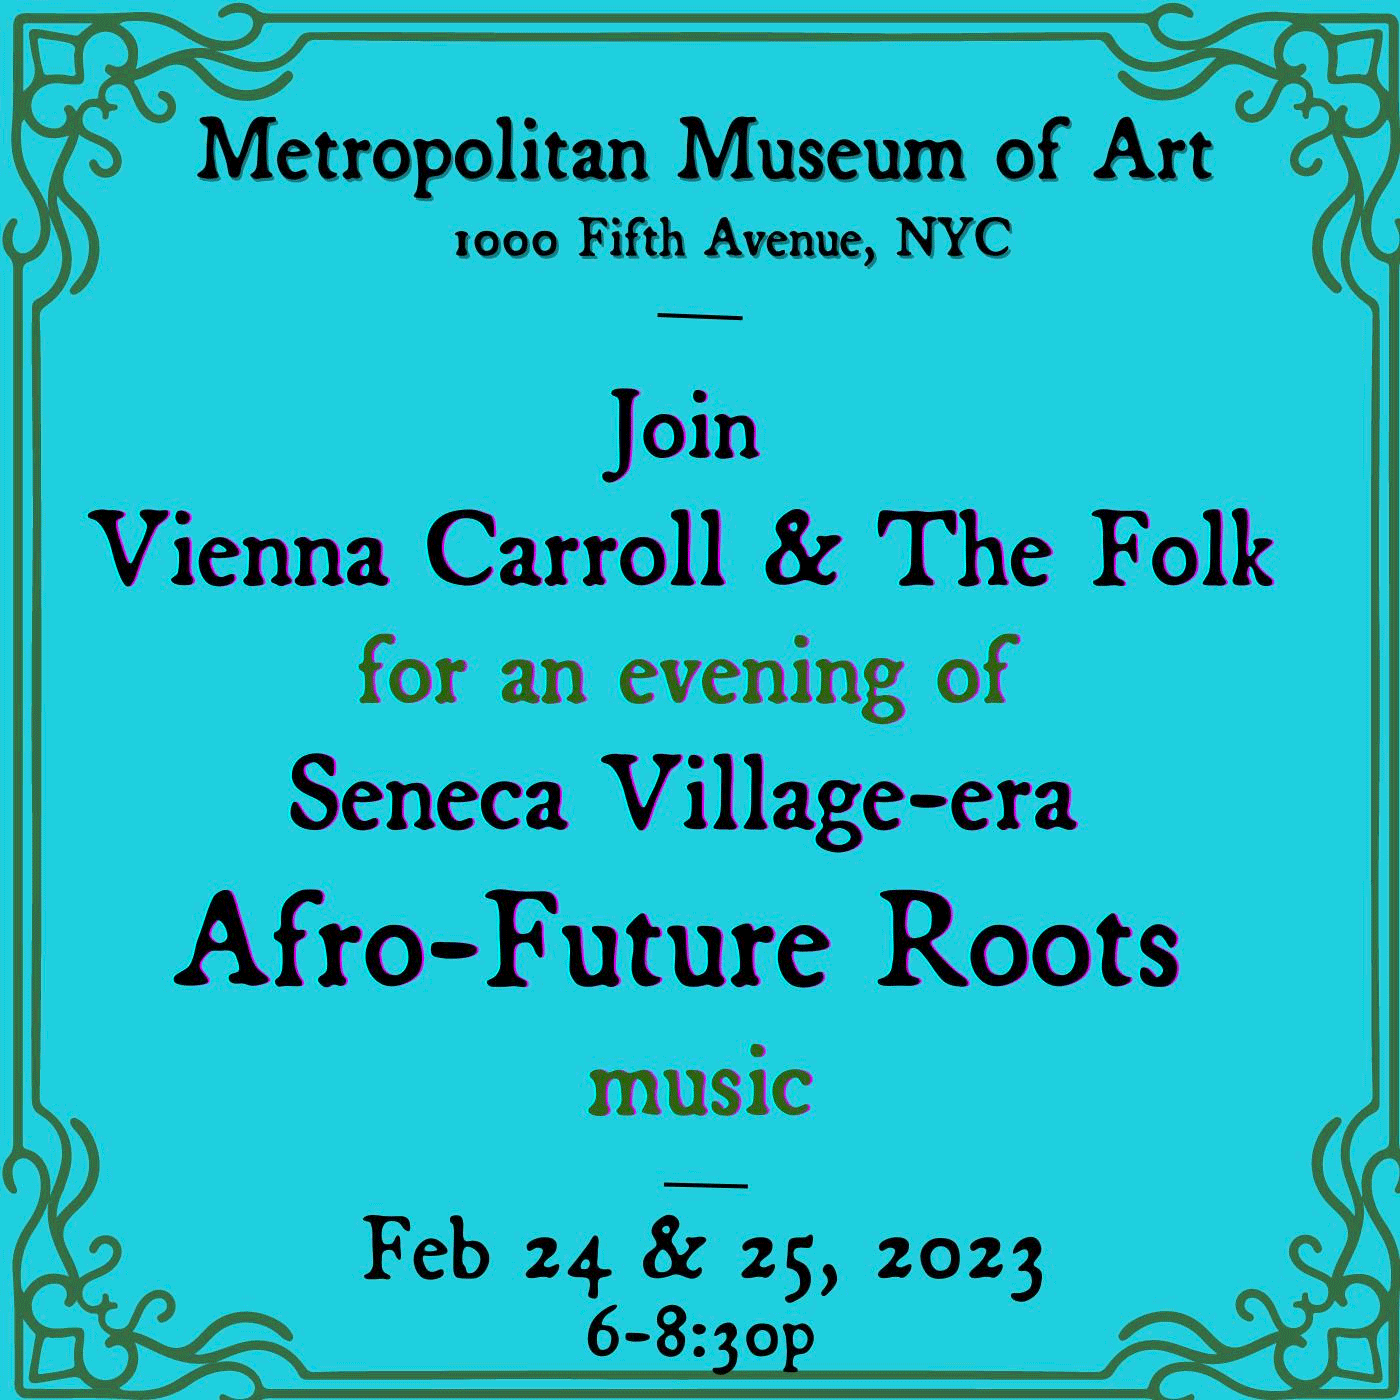 Vienna Carroll and The Folk at the Met!